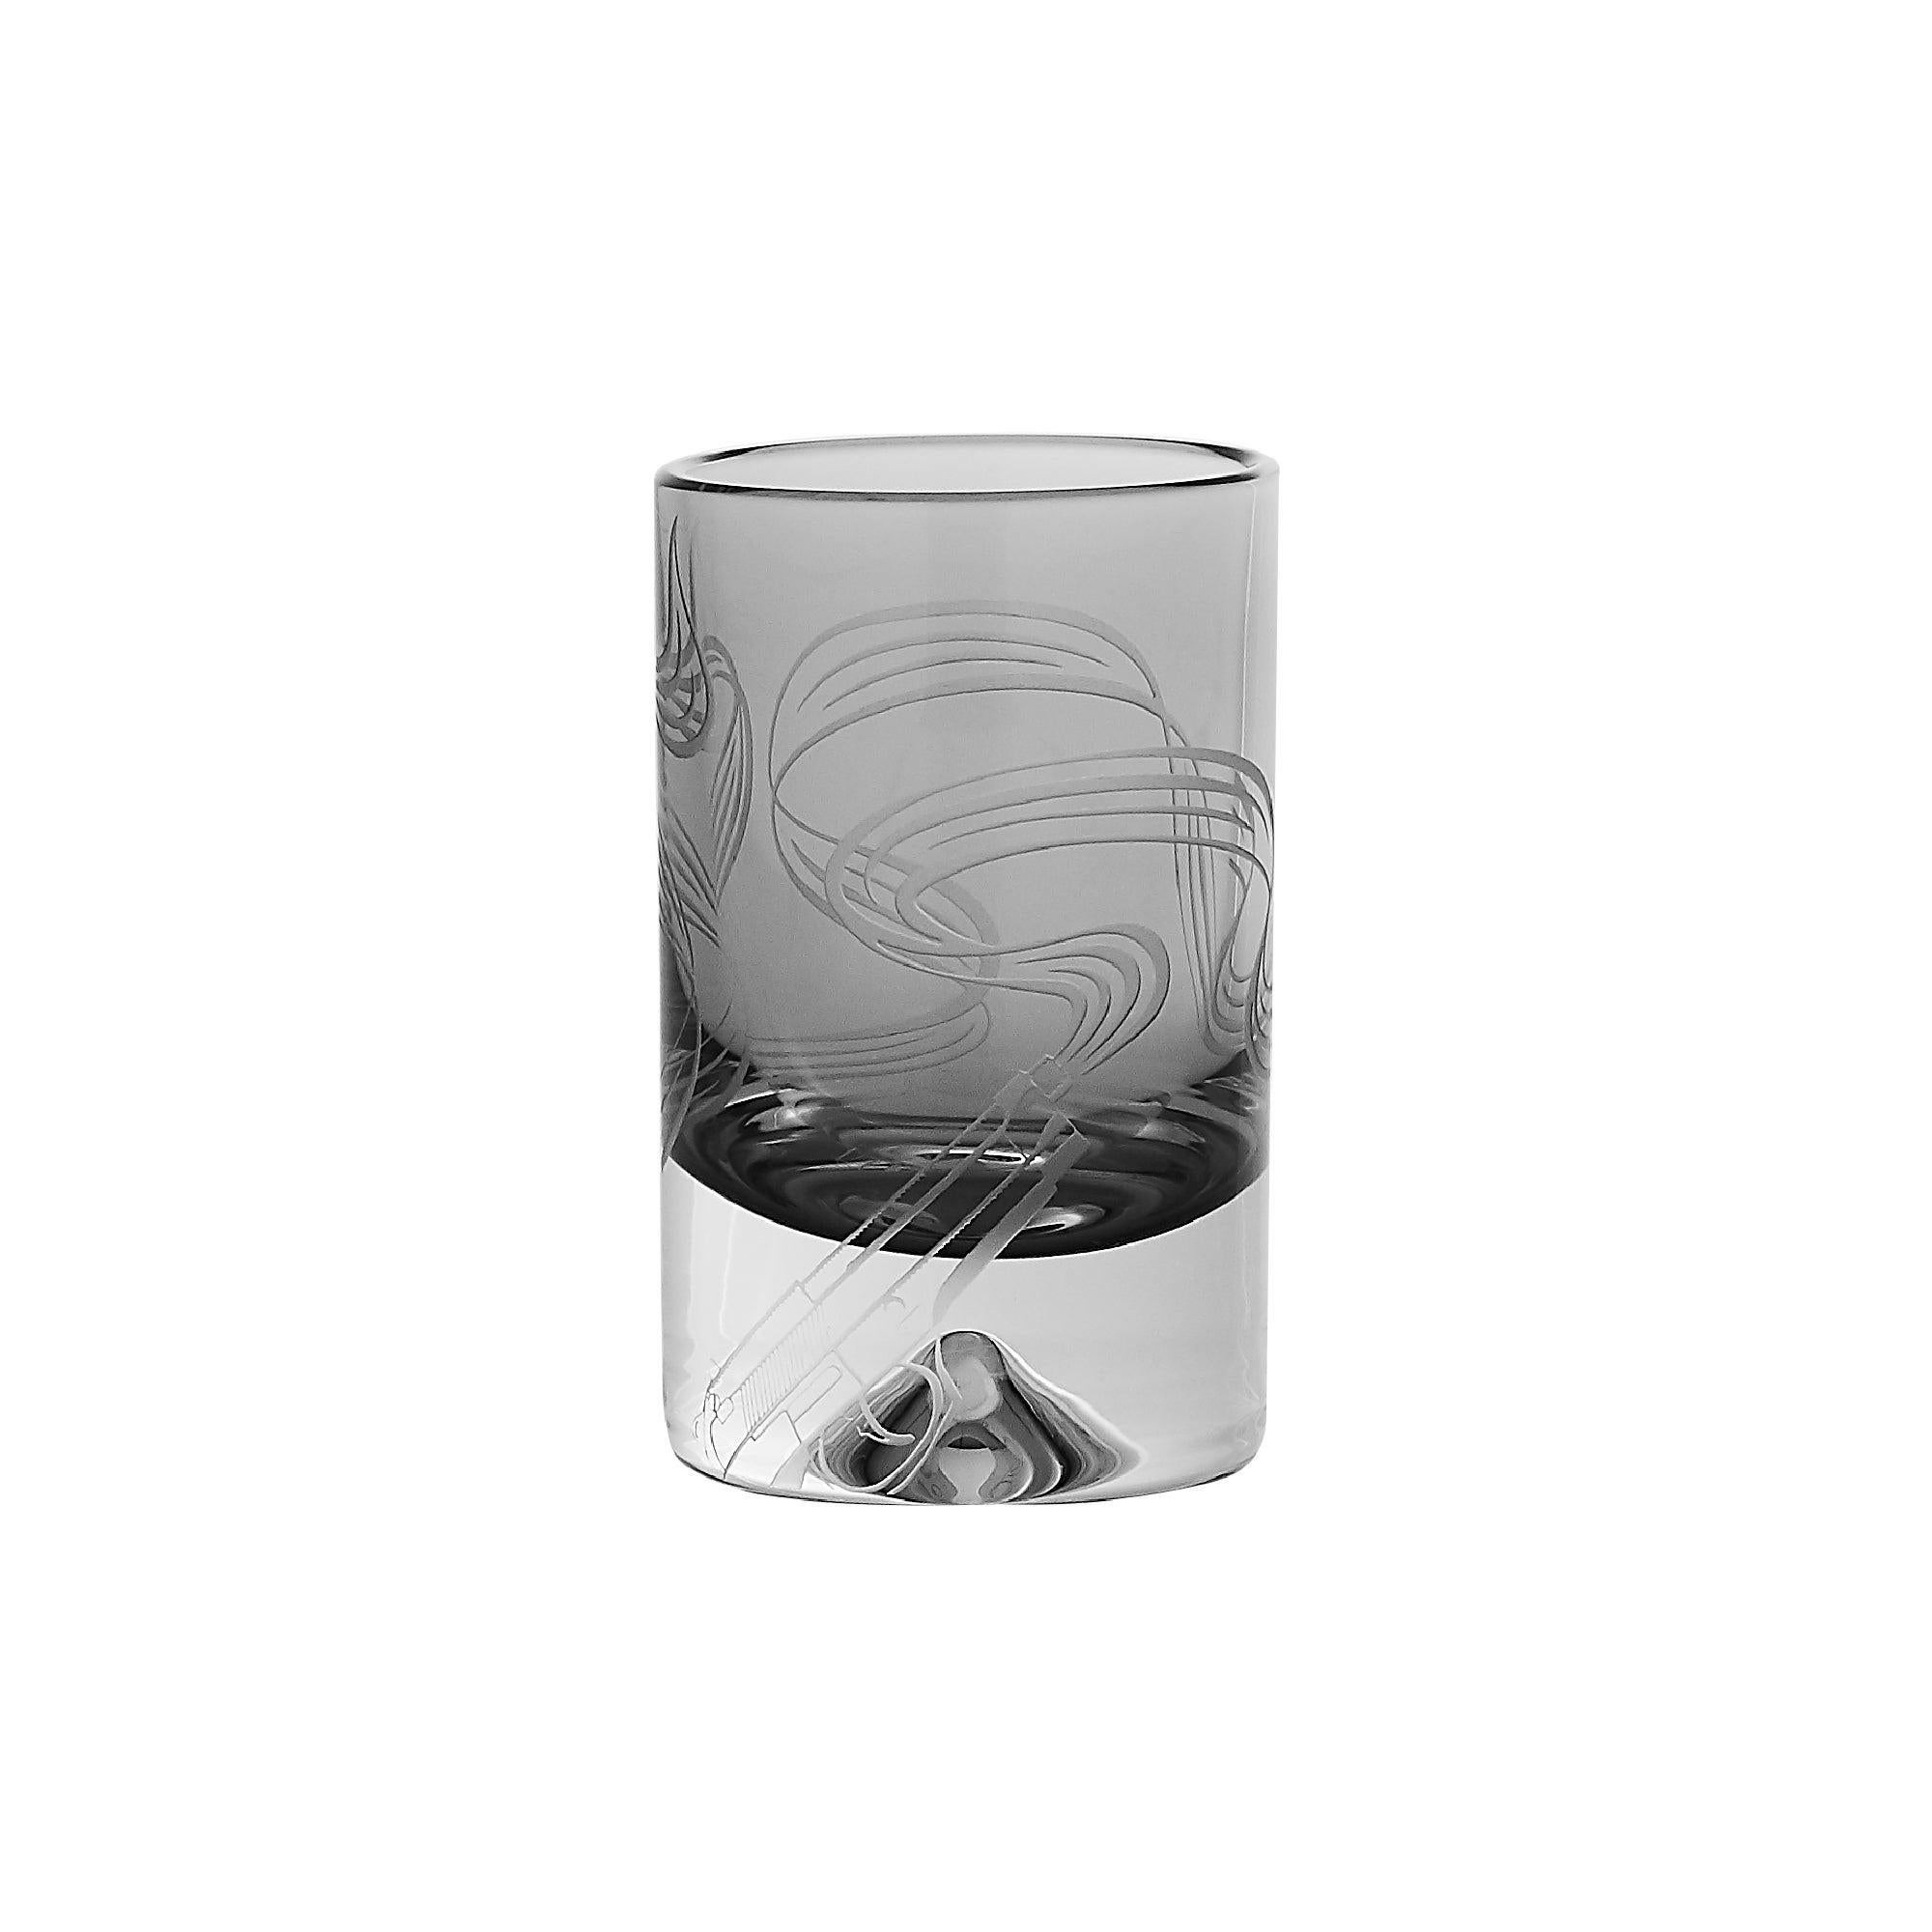 Stephen Webster Russian Roulette Smoking Gun Shot Glass - Set of 2 For Sale